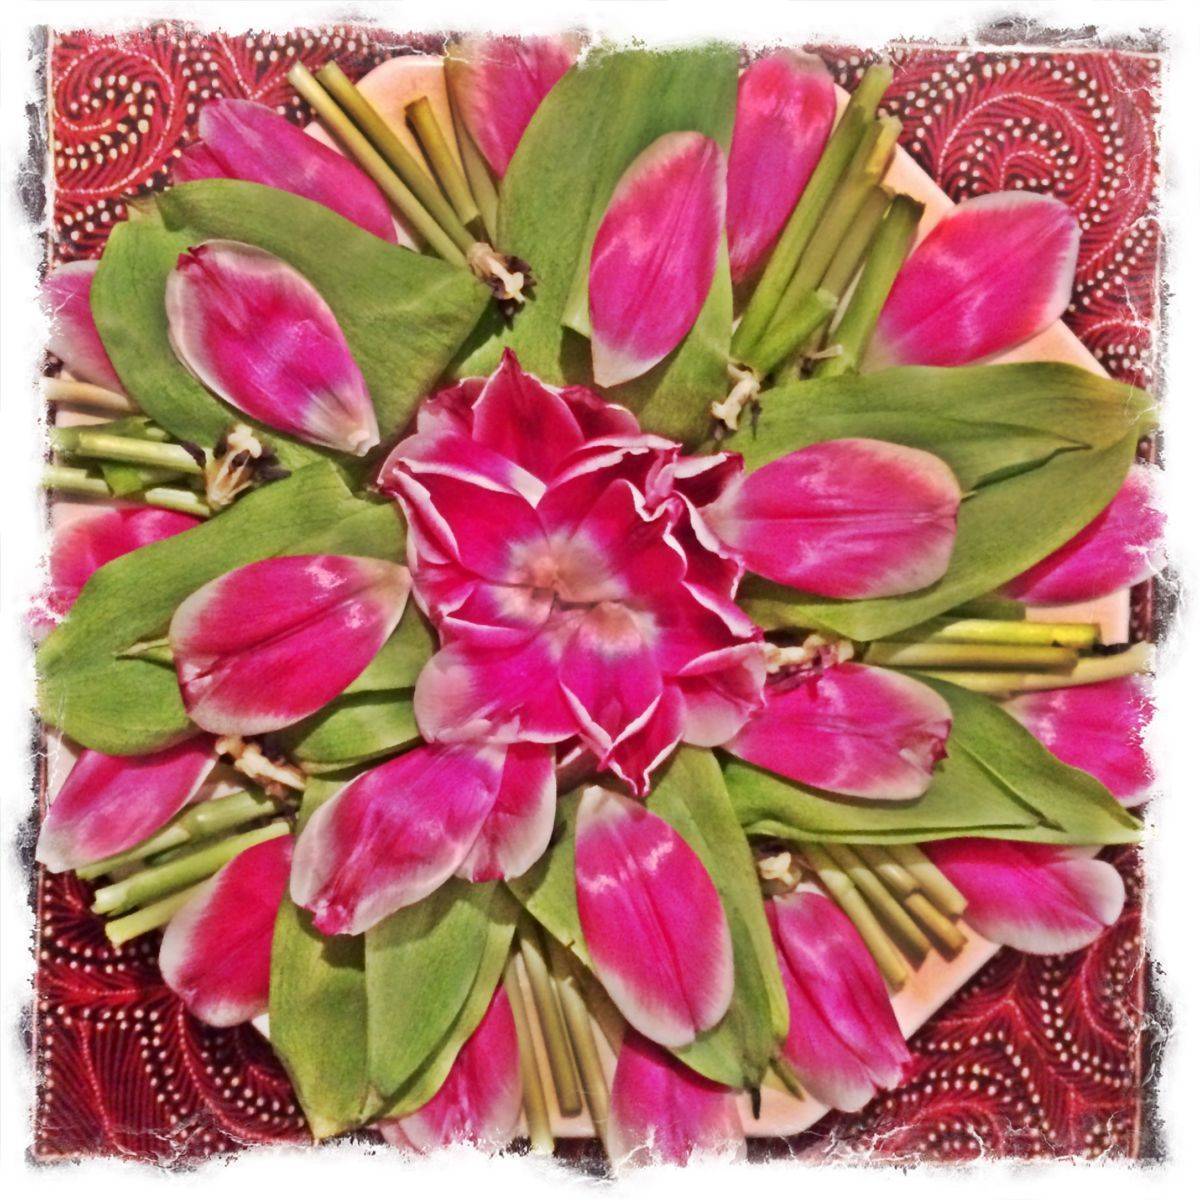 Nature Mandala created from tulips that were beginning to fade.